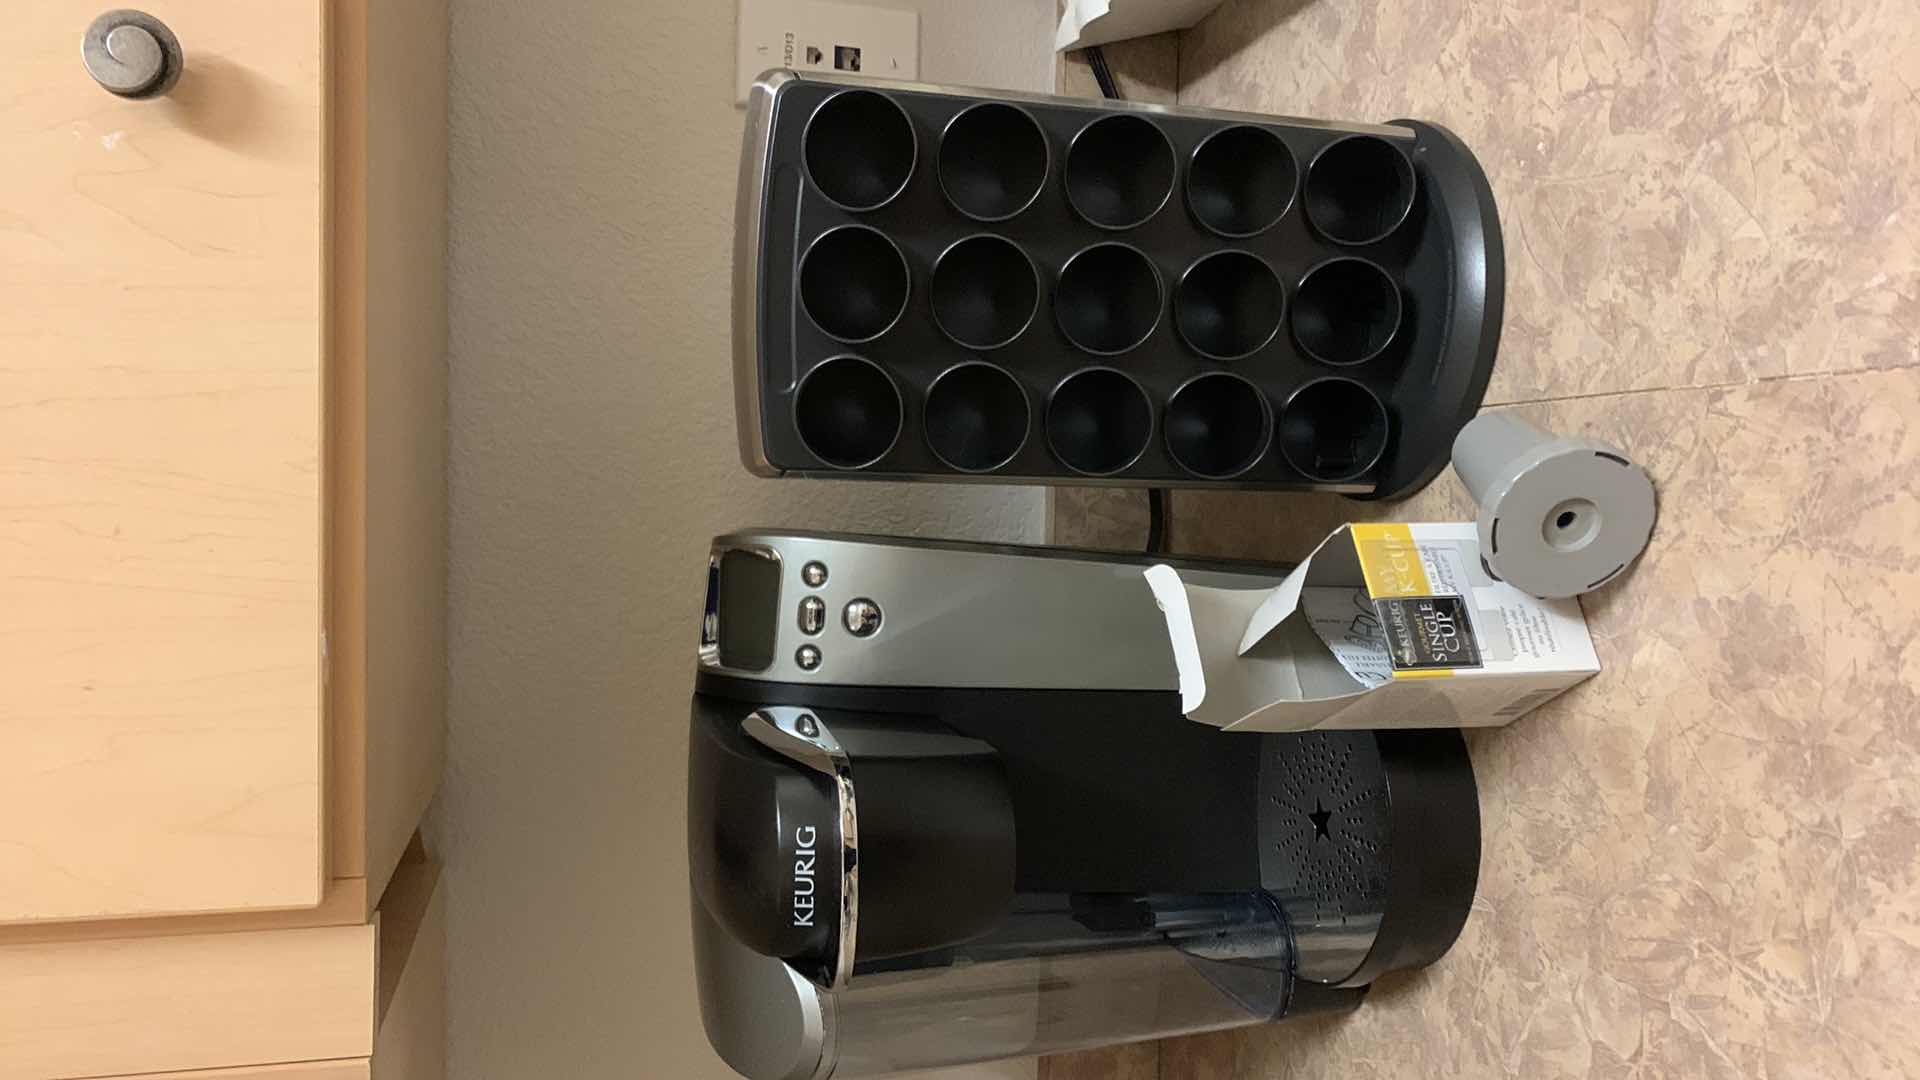 Photo 6 of KEURIG, K-CUP AND SPINNING ORGANIZER